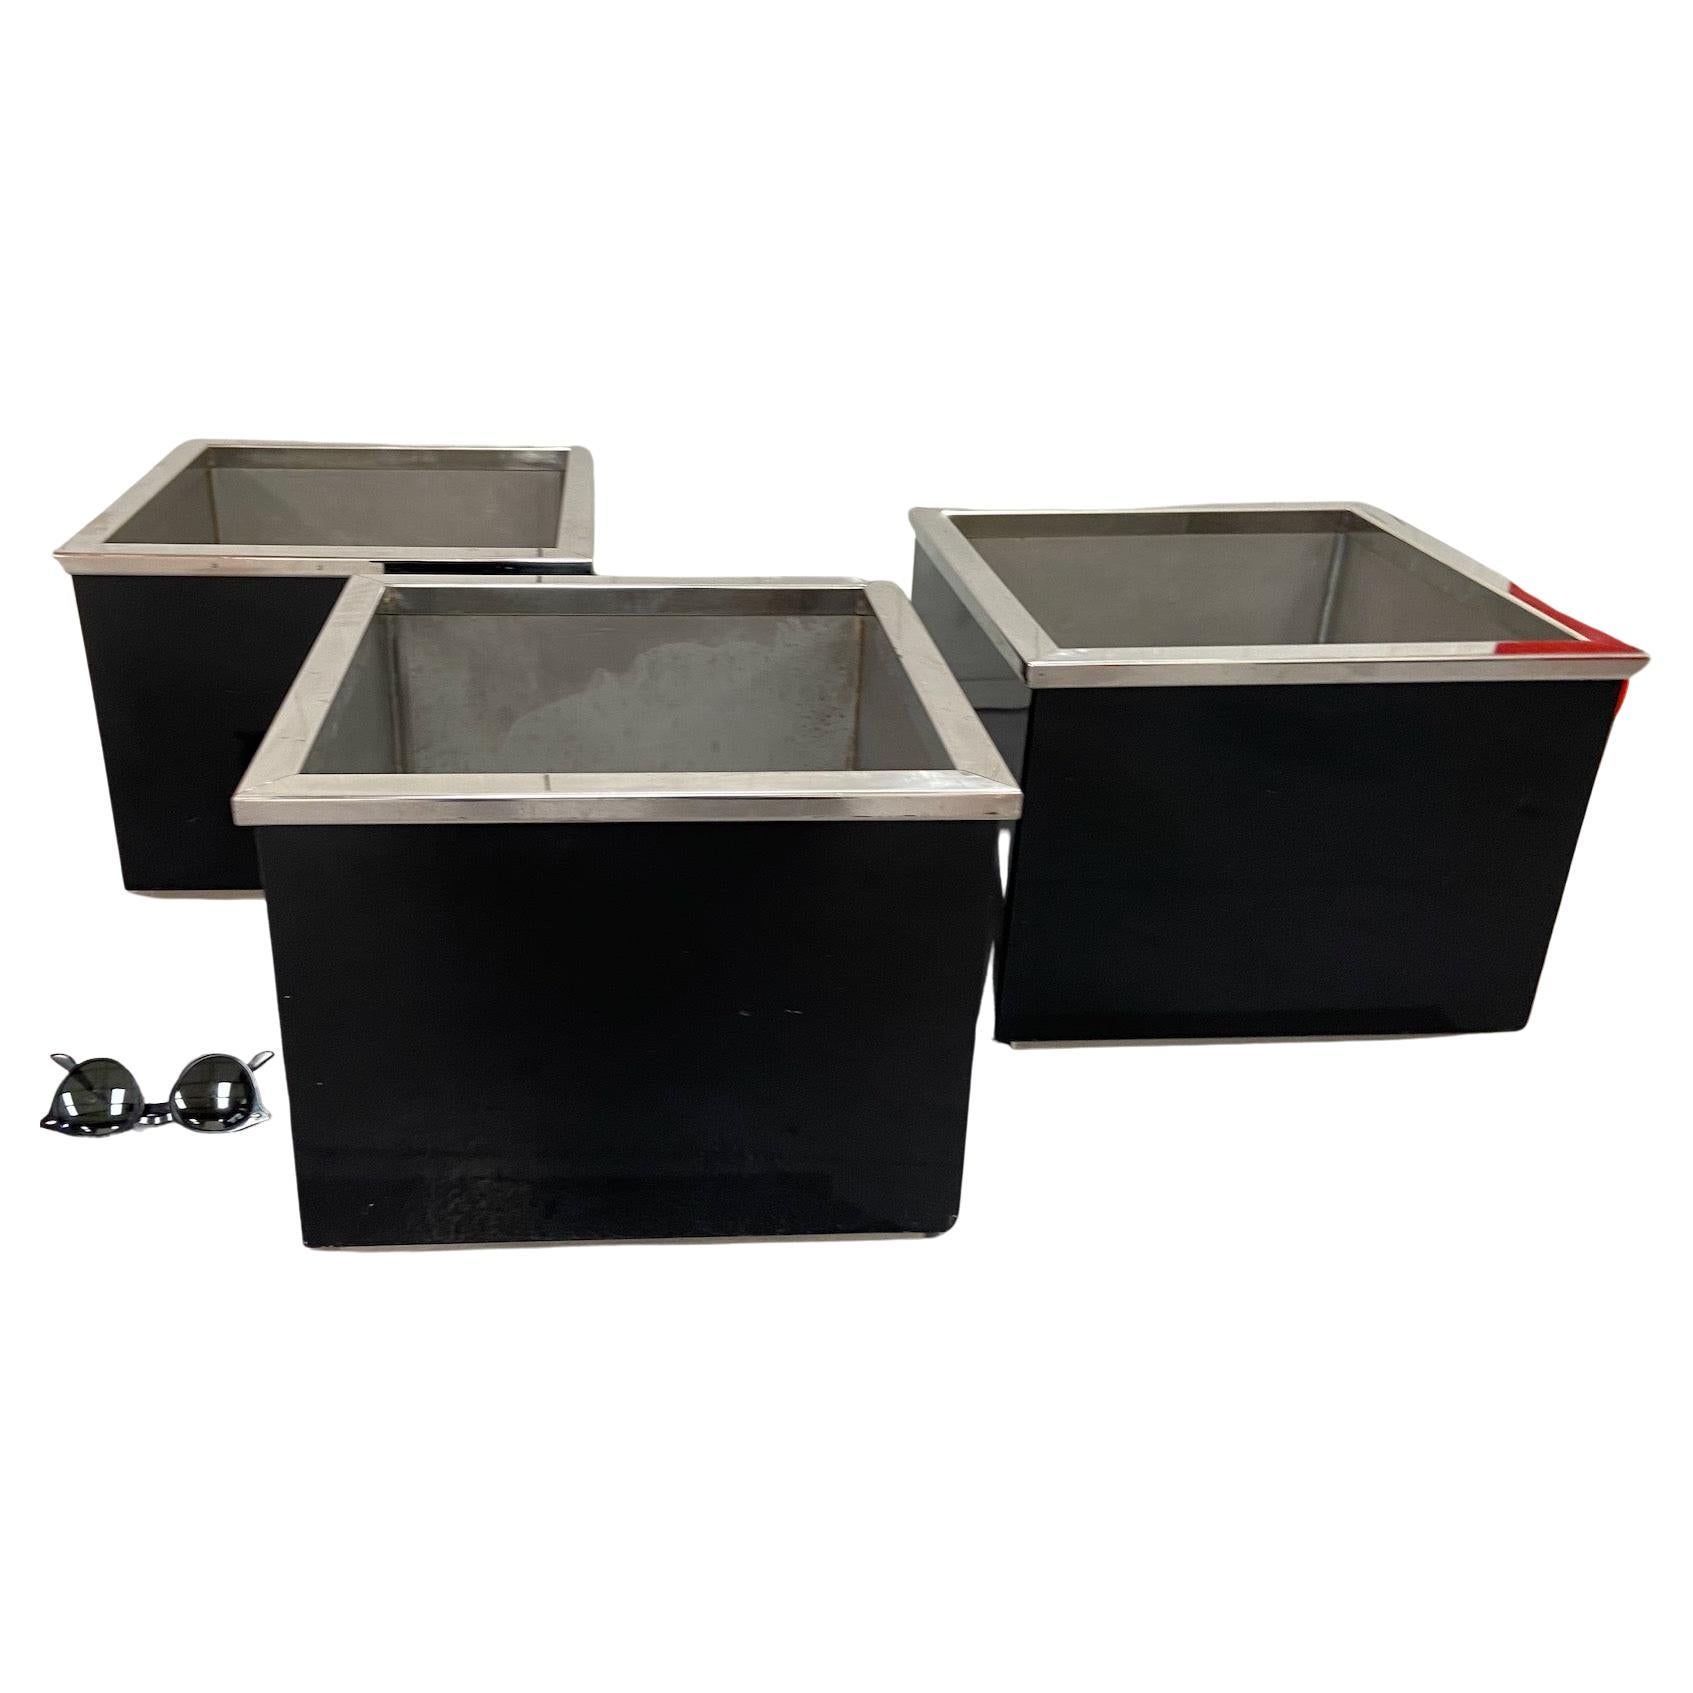 Enameled 1960s-70s black enamel and chrome metal cubic planters, manner of Willy Rizzo For Sale